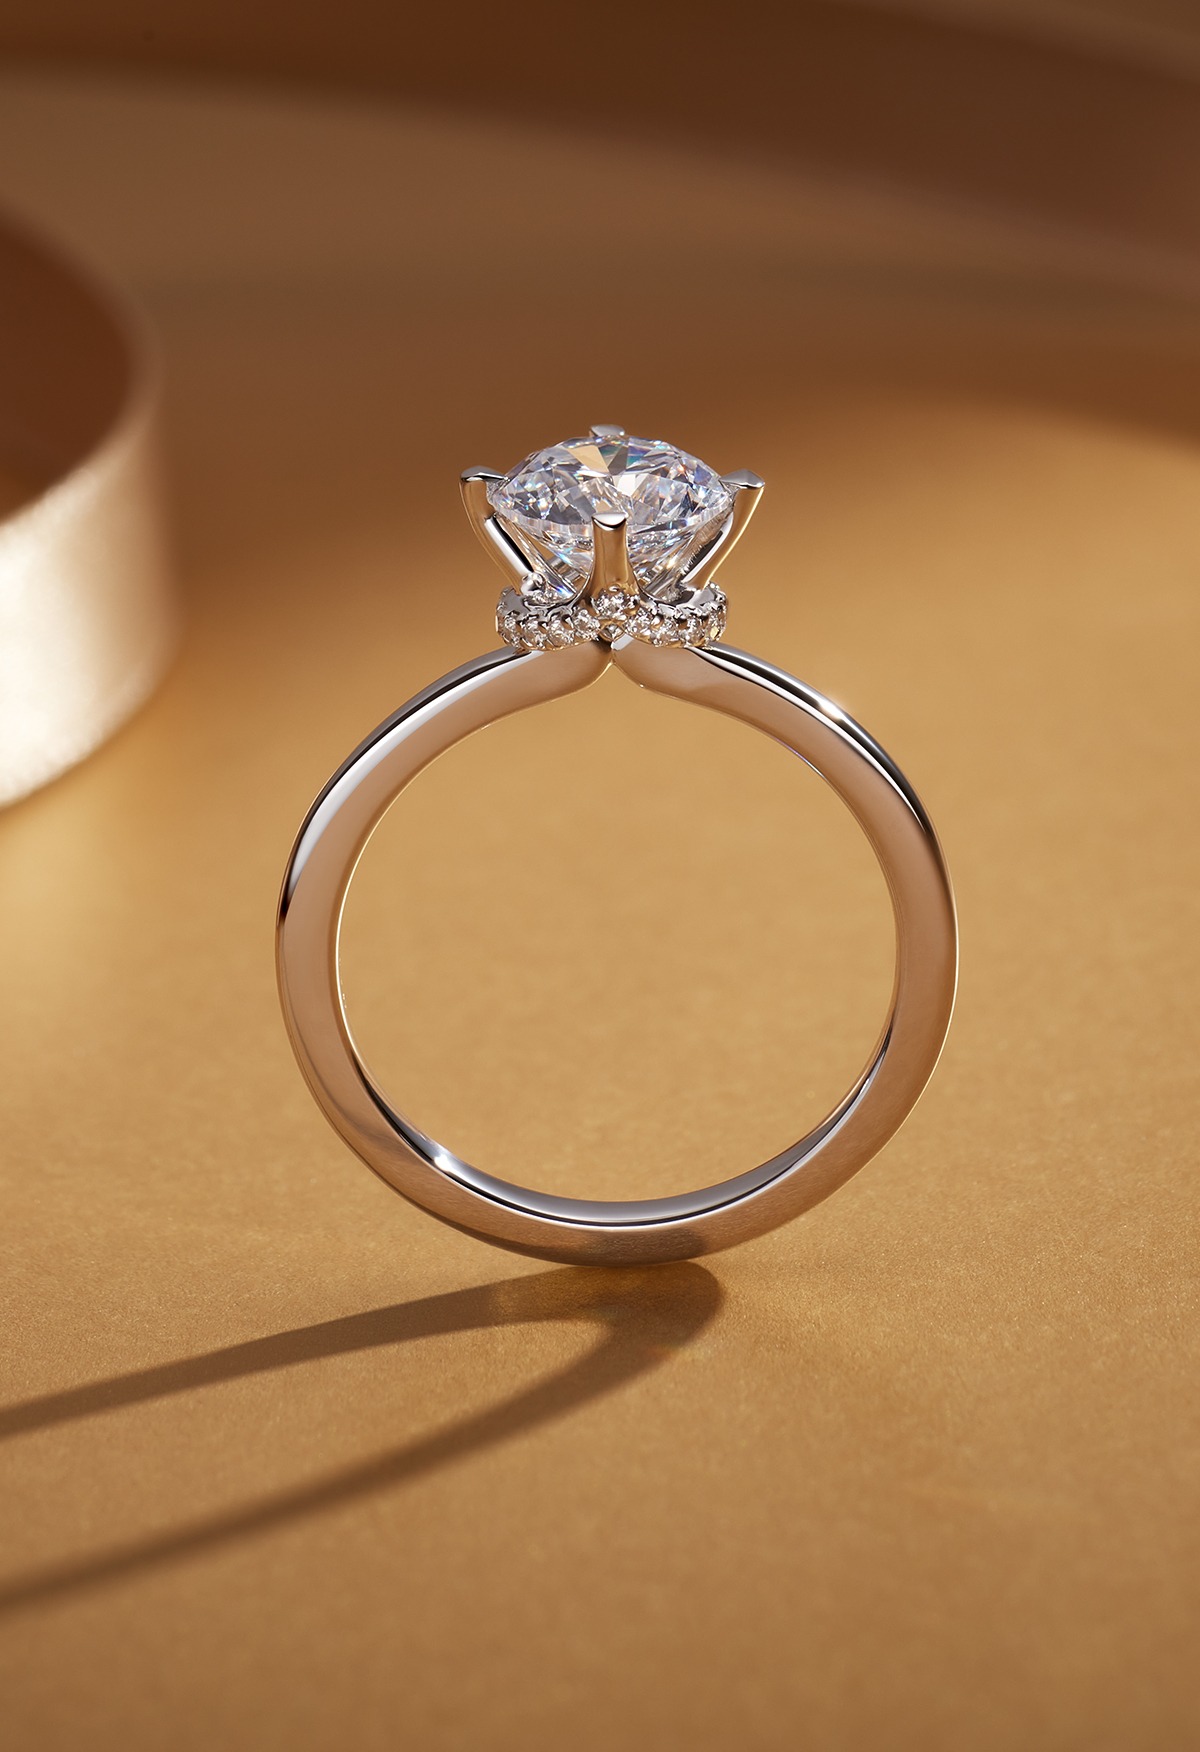 With Clarity is the best custom engagement ring brand